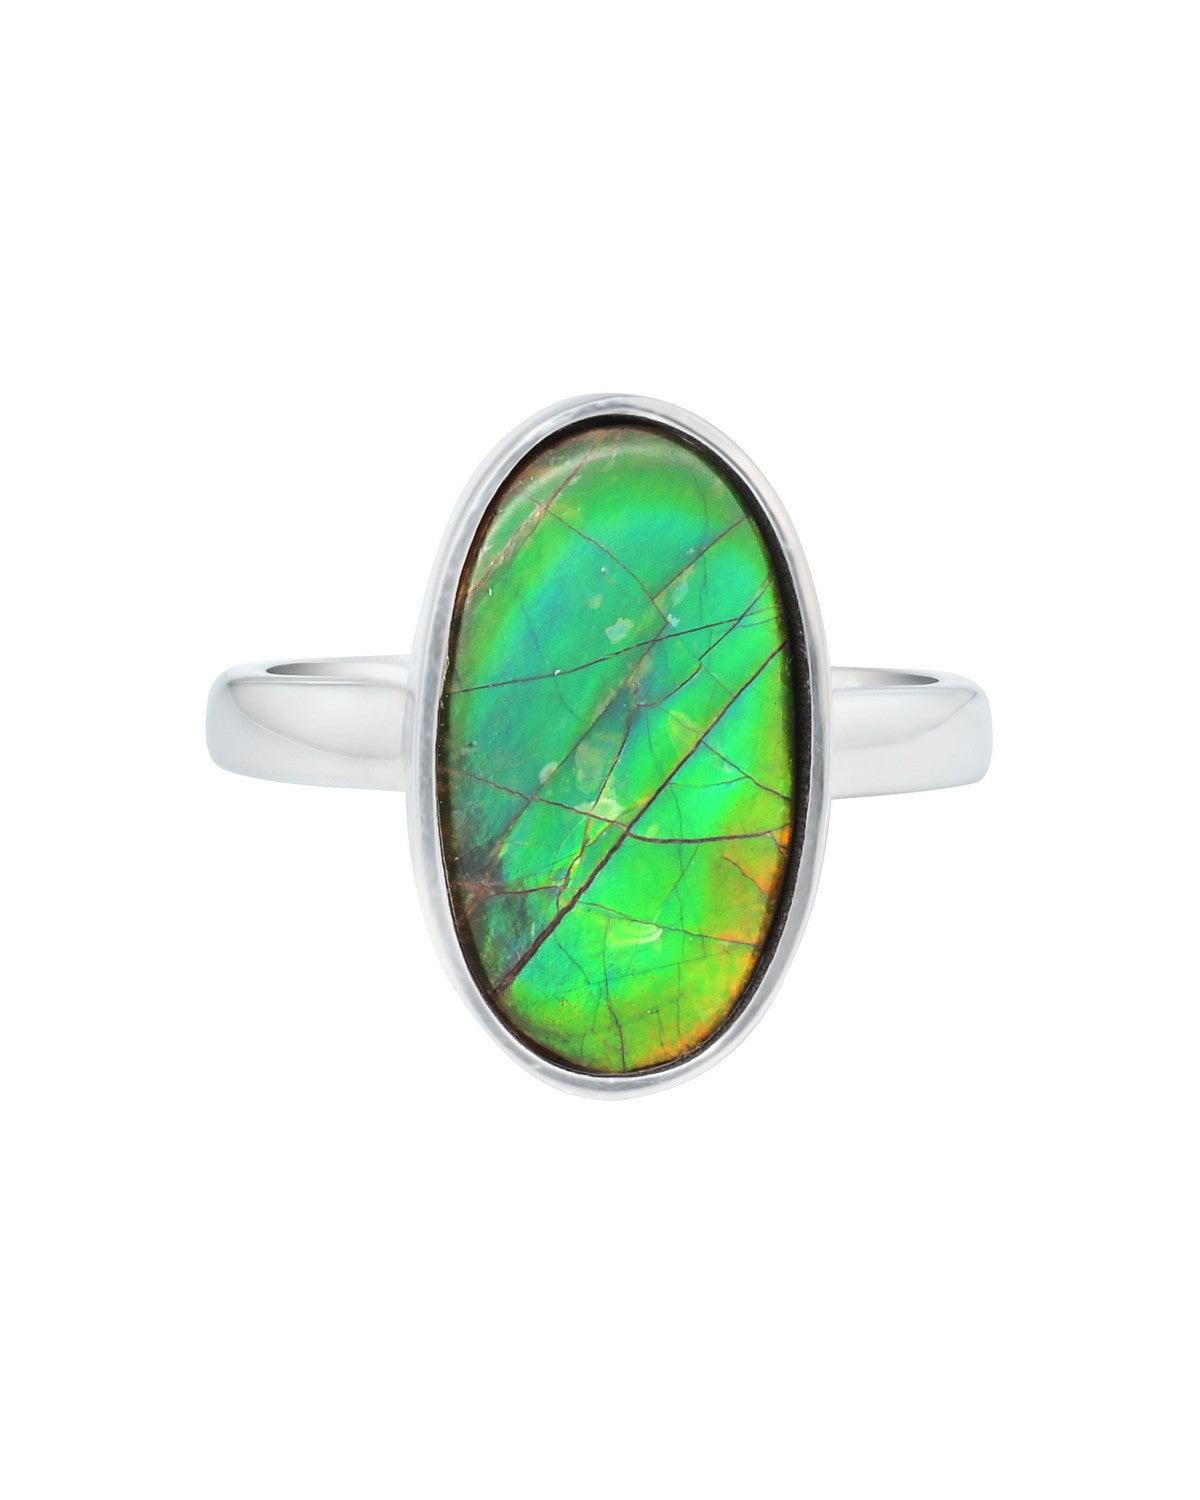 5.70 Ct. Ammolite Ring Solid 925 Sterling Silver Jewelry - YoTreasure